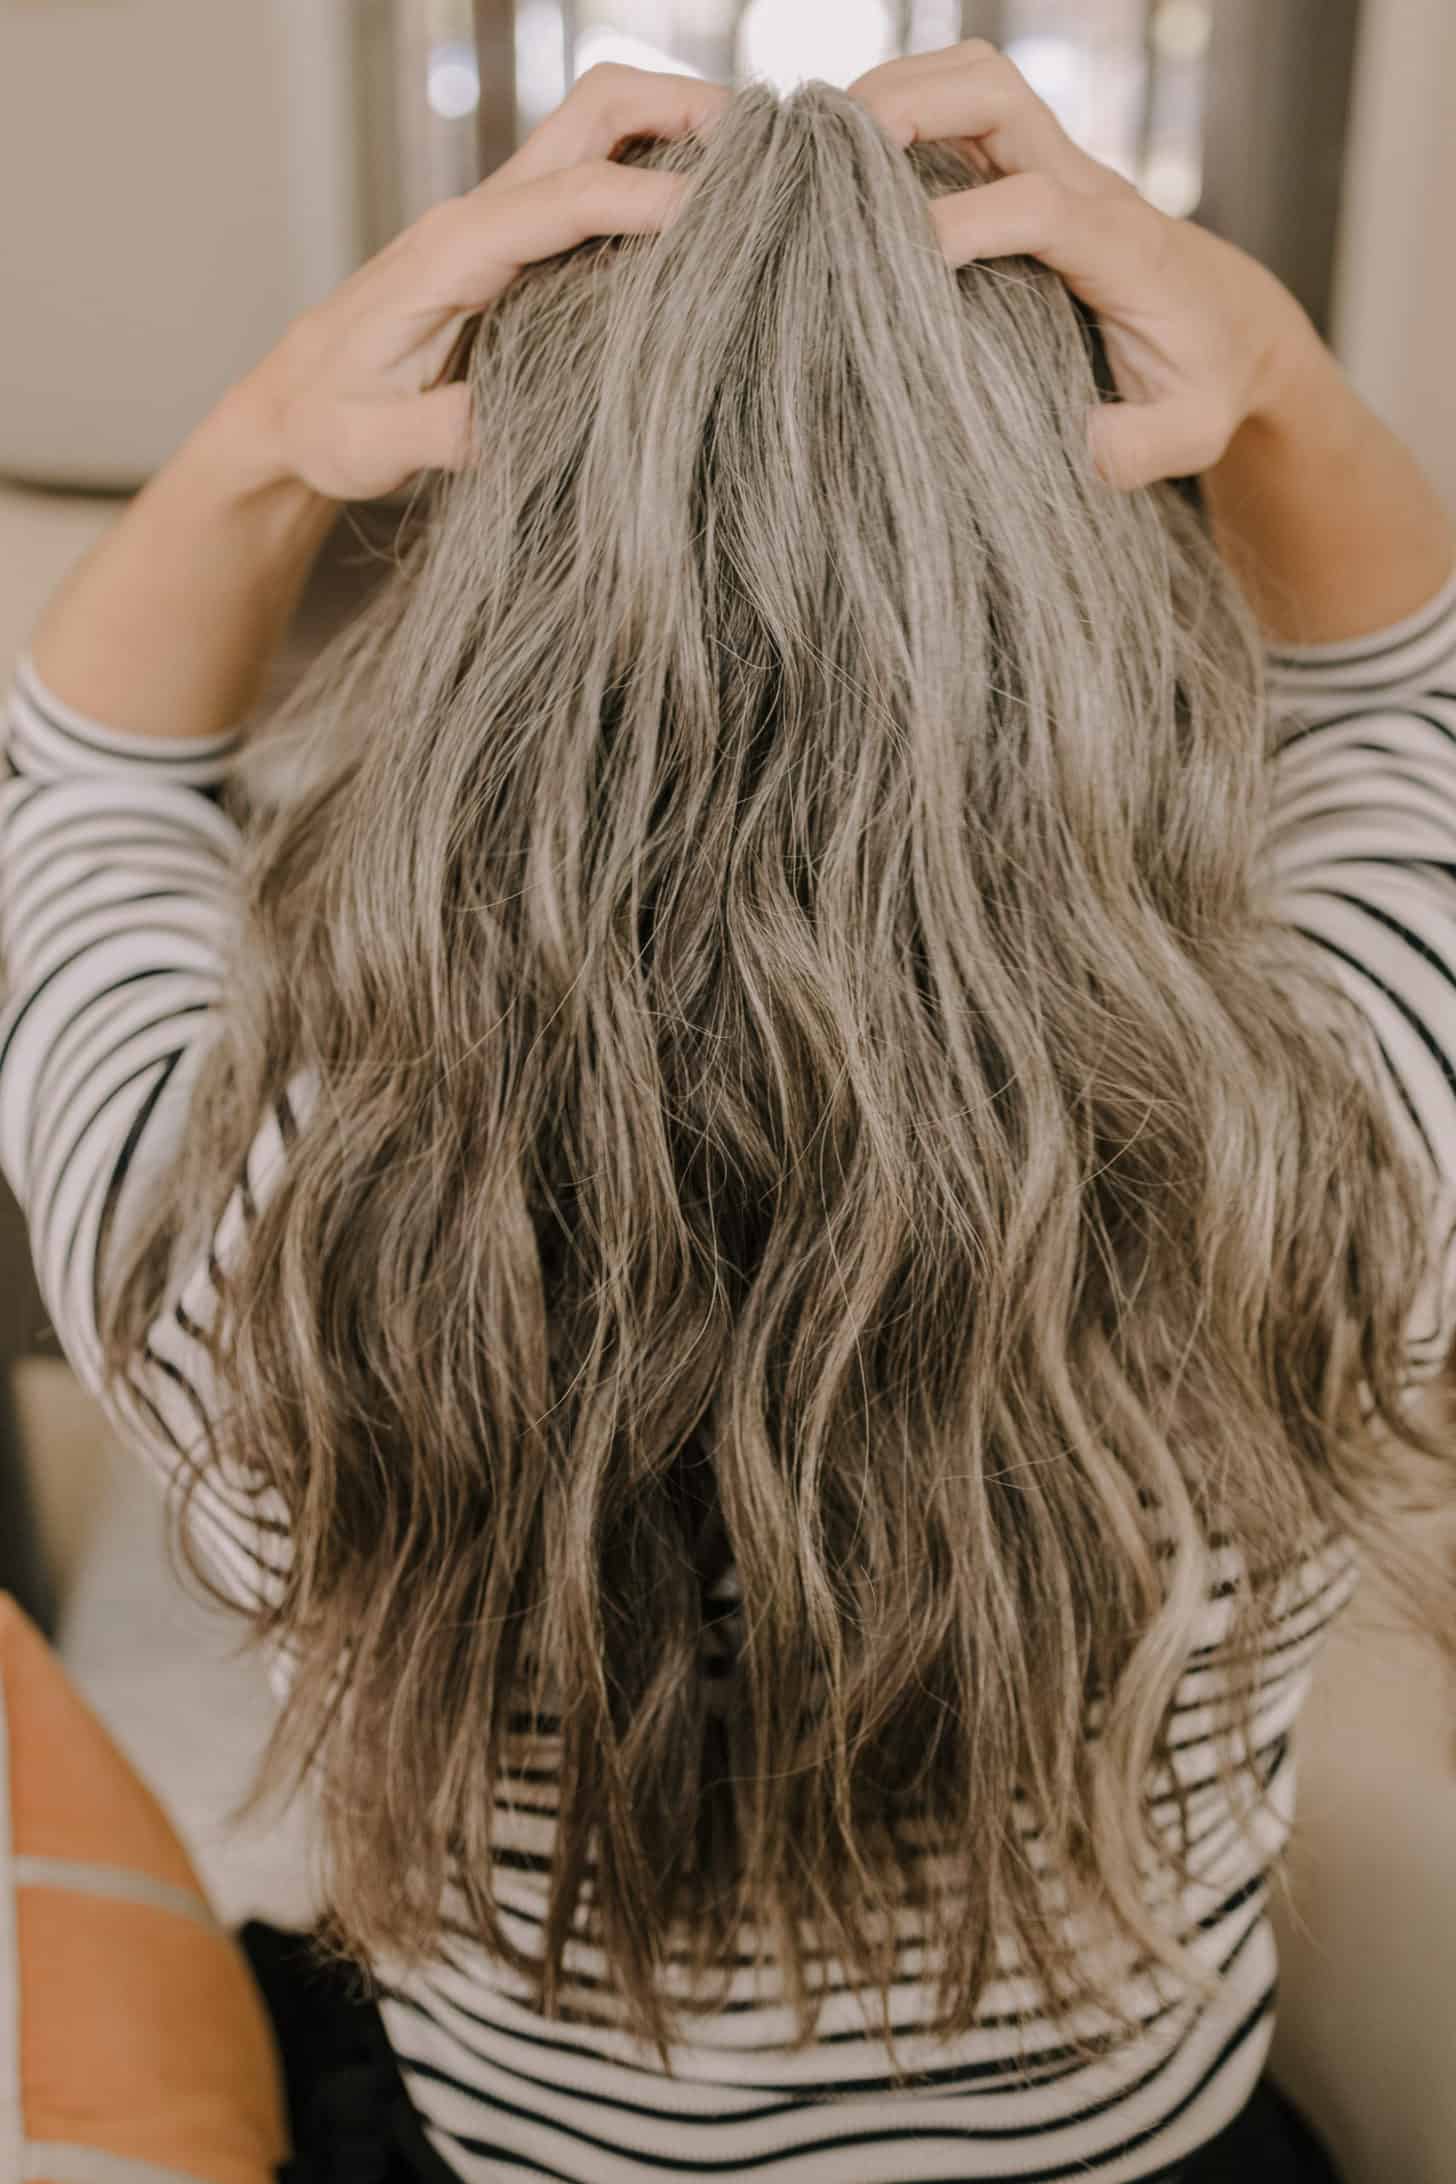 the back of a woman's with long gray and black hair